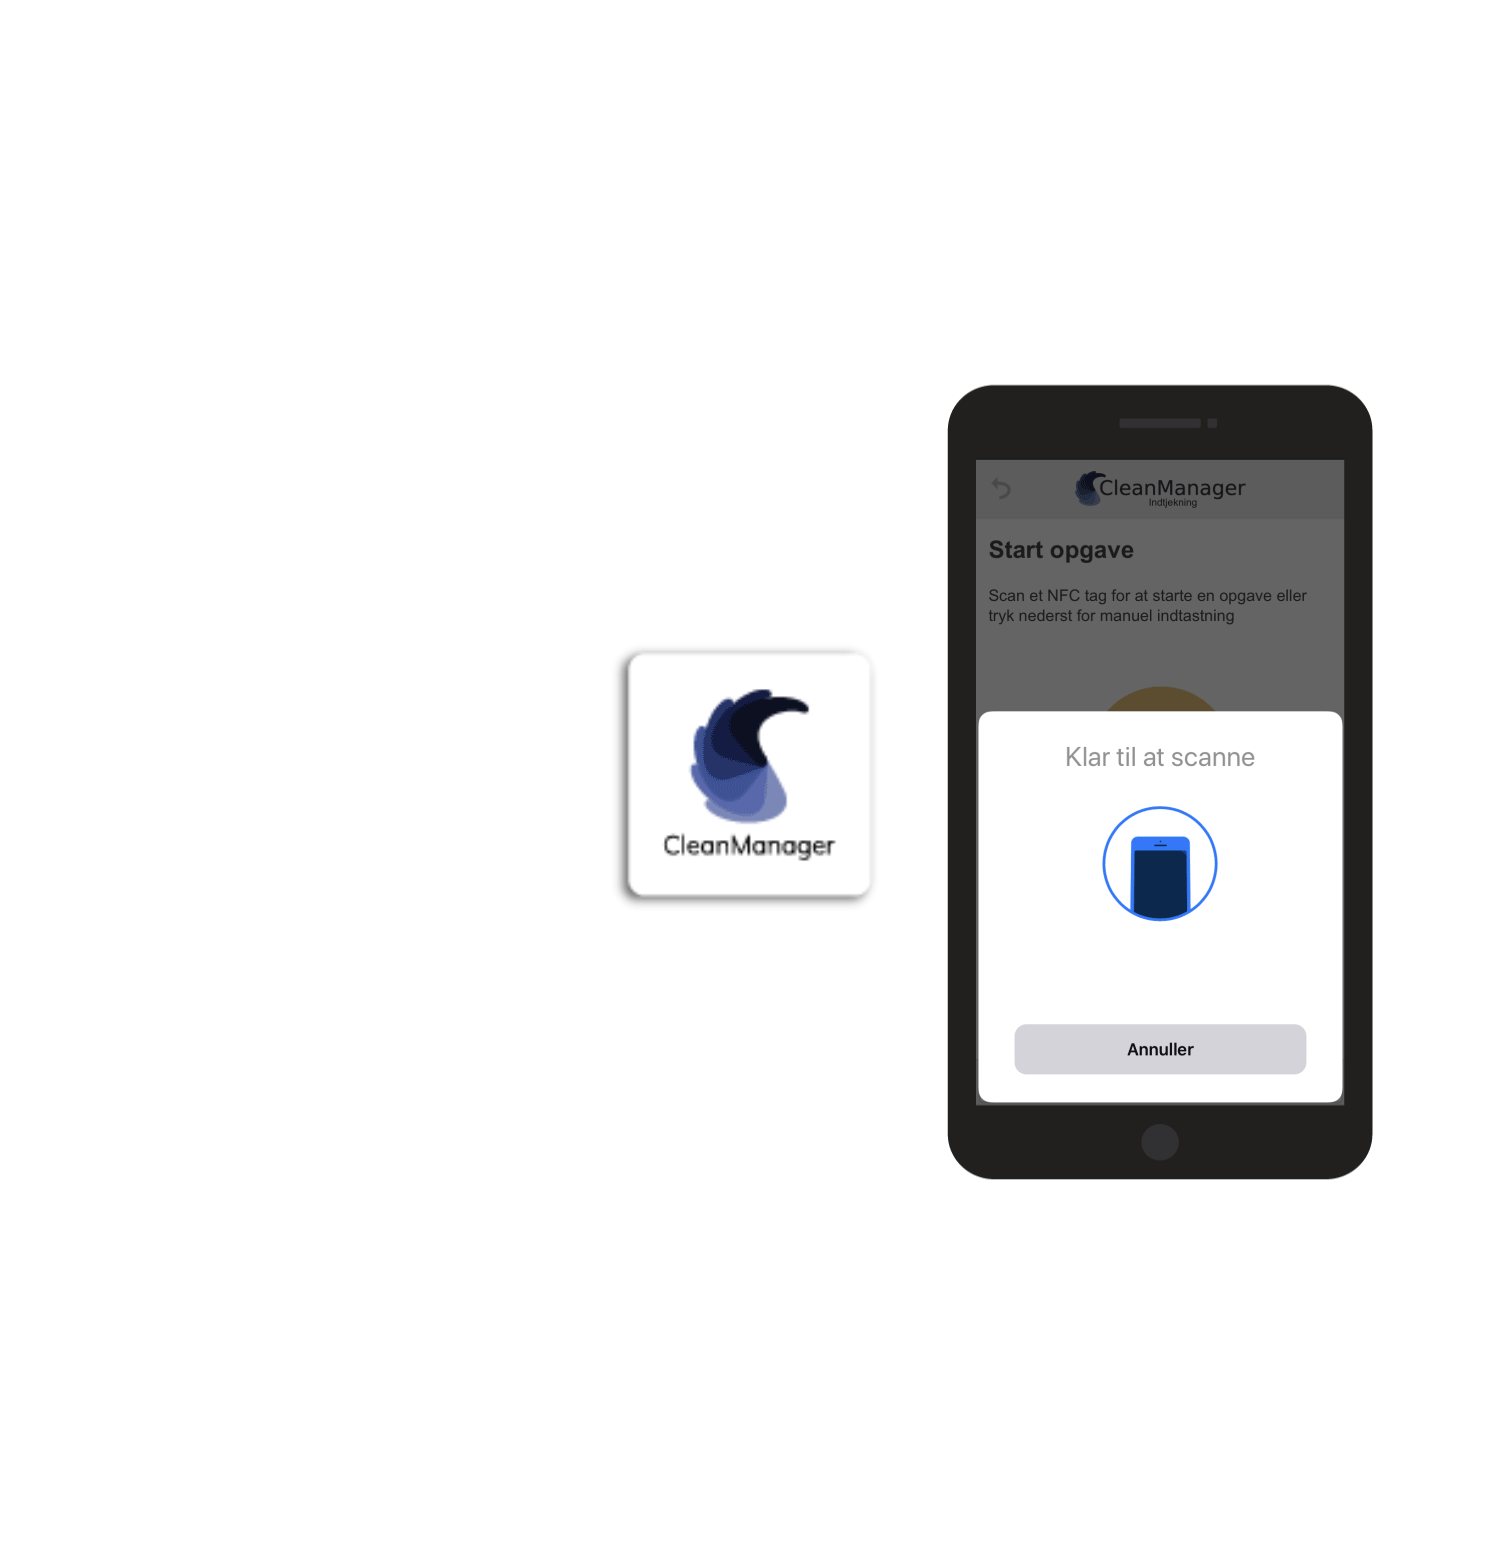 How do I scan NFC tags? – CleanManager